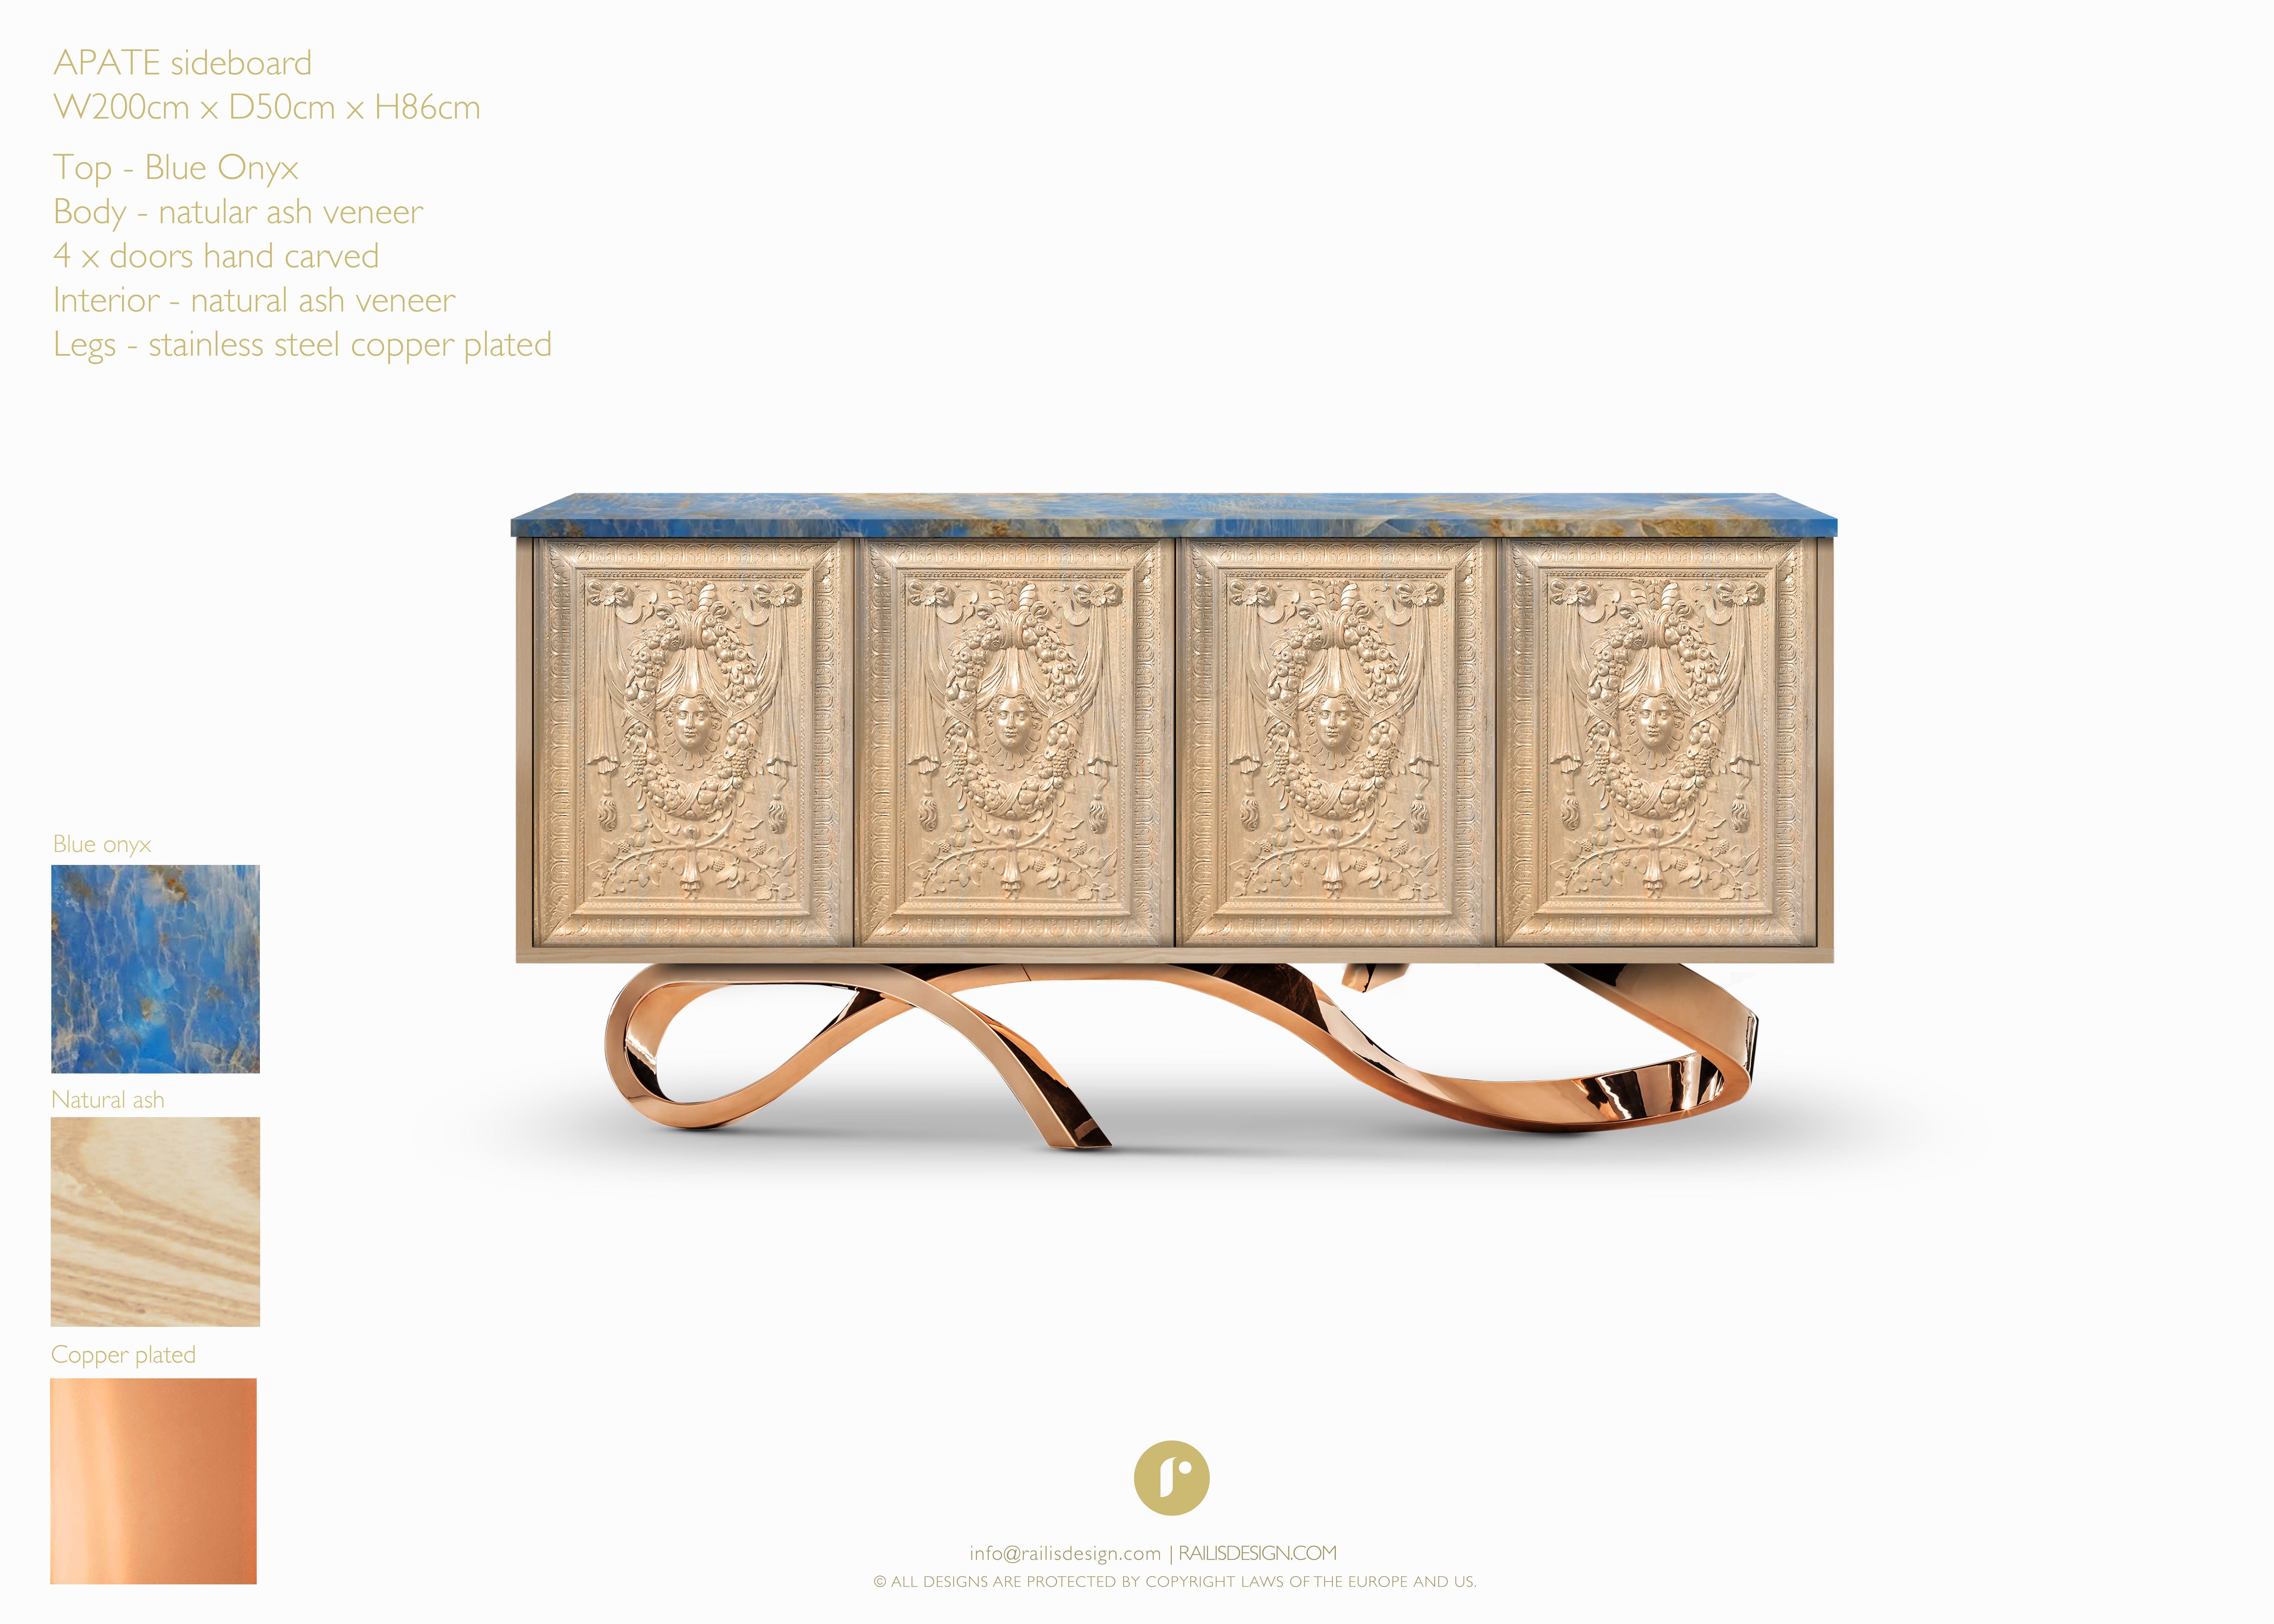 Modern Contemporary Apate Sideboard in Marble, Oak, Copper For Sale